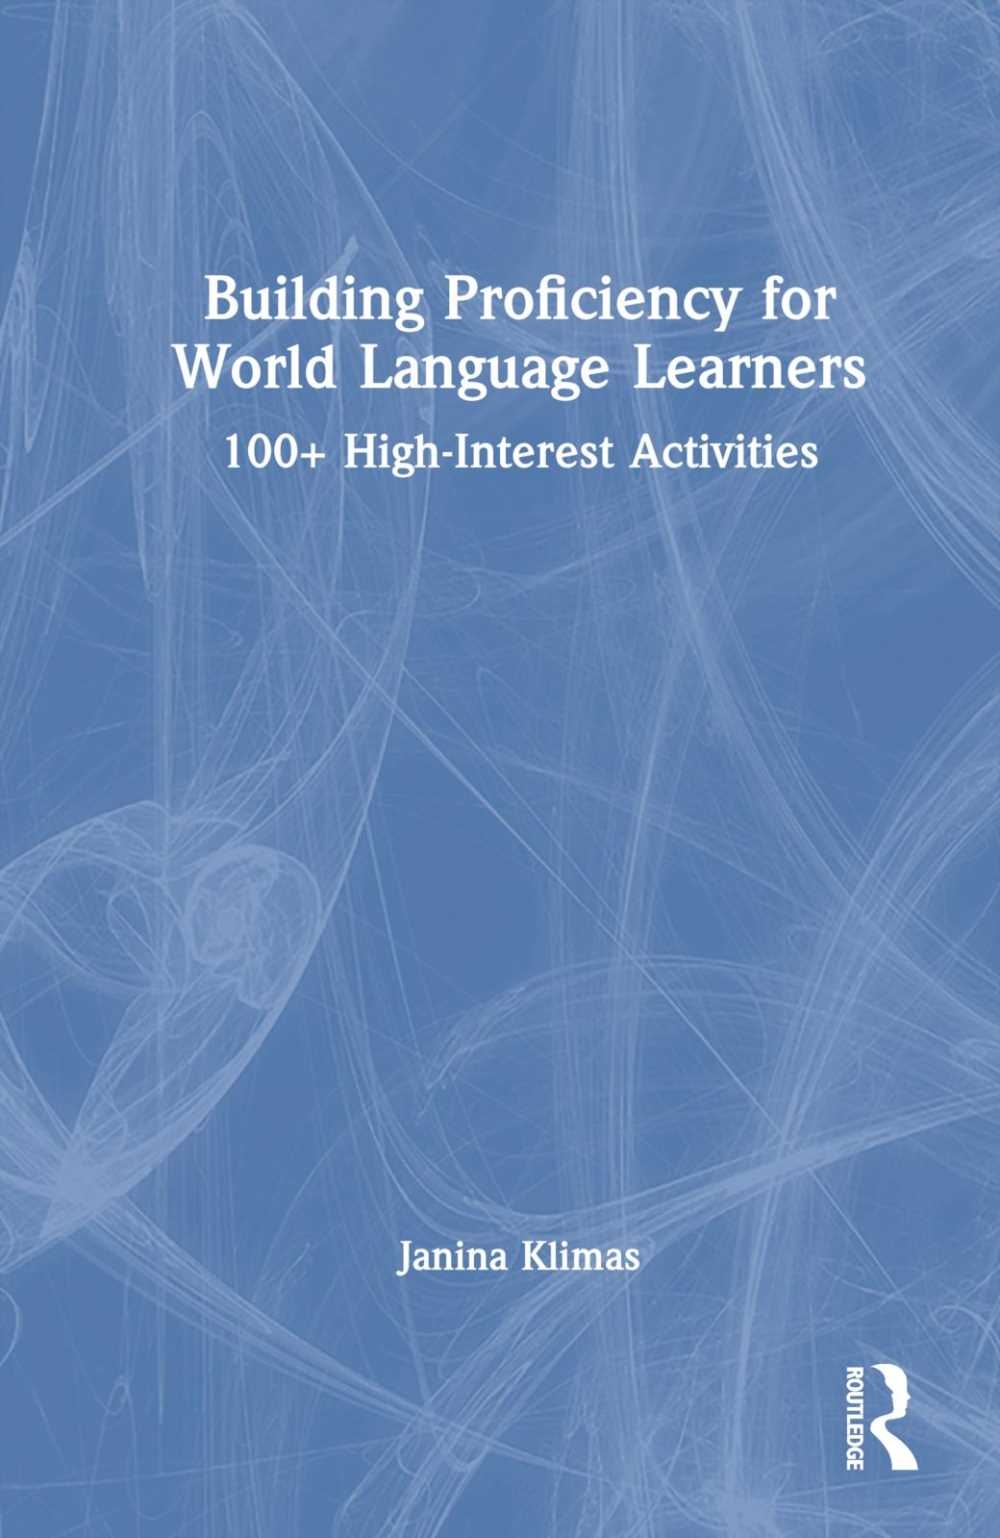 Building Proficiency for World Language Learners: 100+ High-Interest Activities